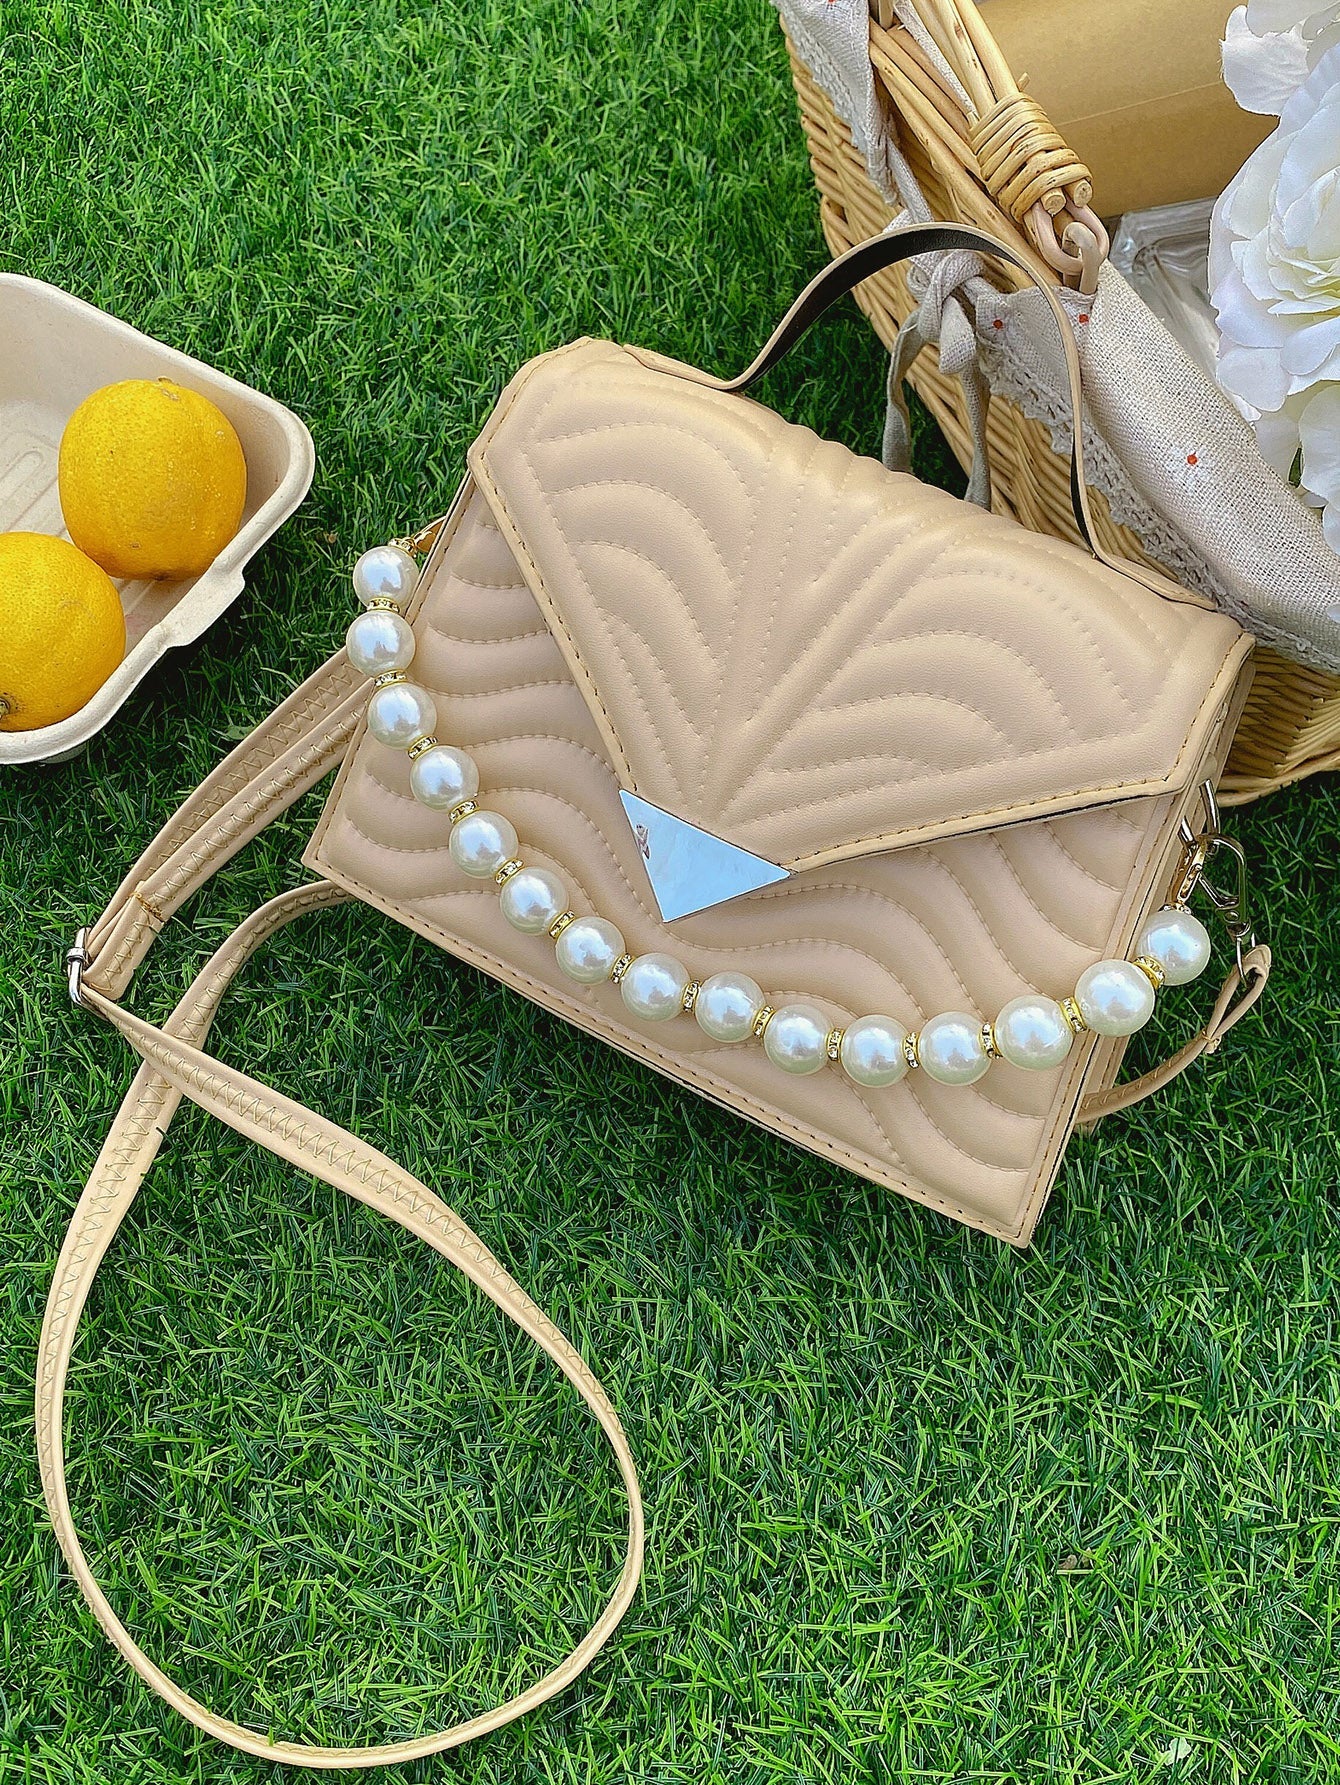 Faux Pearl Decor Quilted Satchel Bag